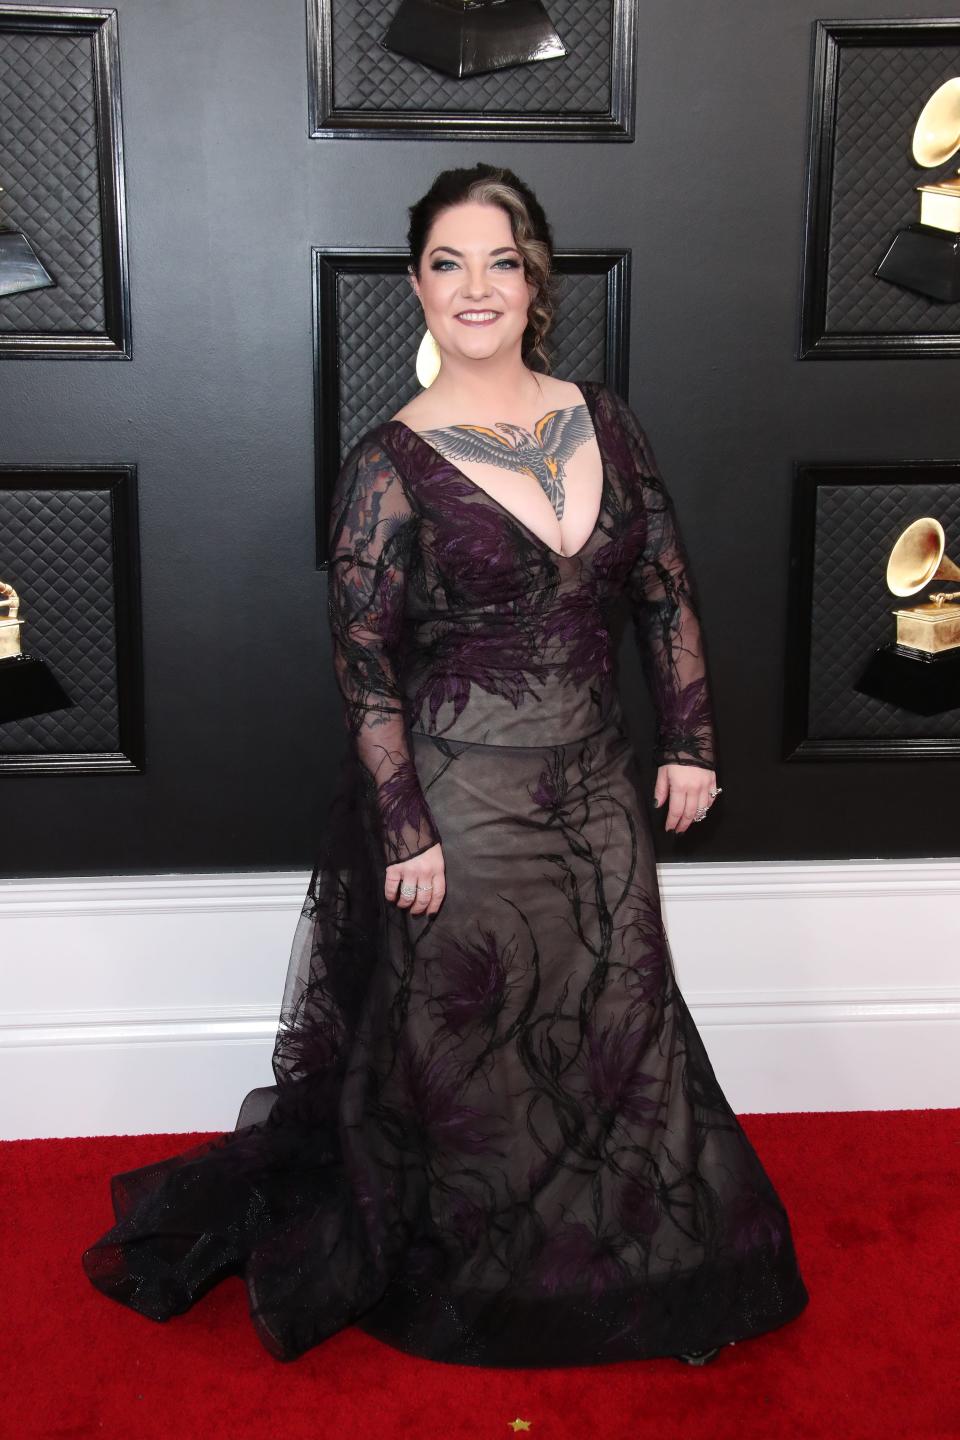 Ashley McBryde arrives on the red carpet during the 62nd annual GRAMMY Awards on Jan. 26, 2020 at the STAPLES Center in Los Angeles, Calif.